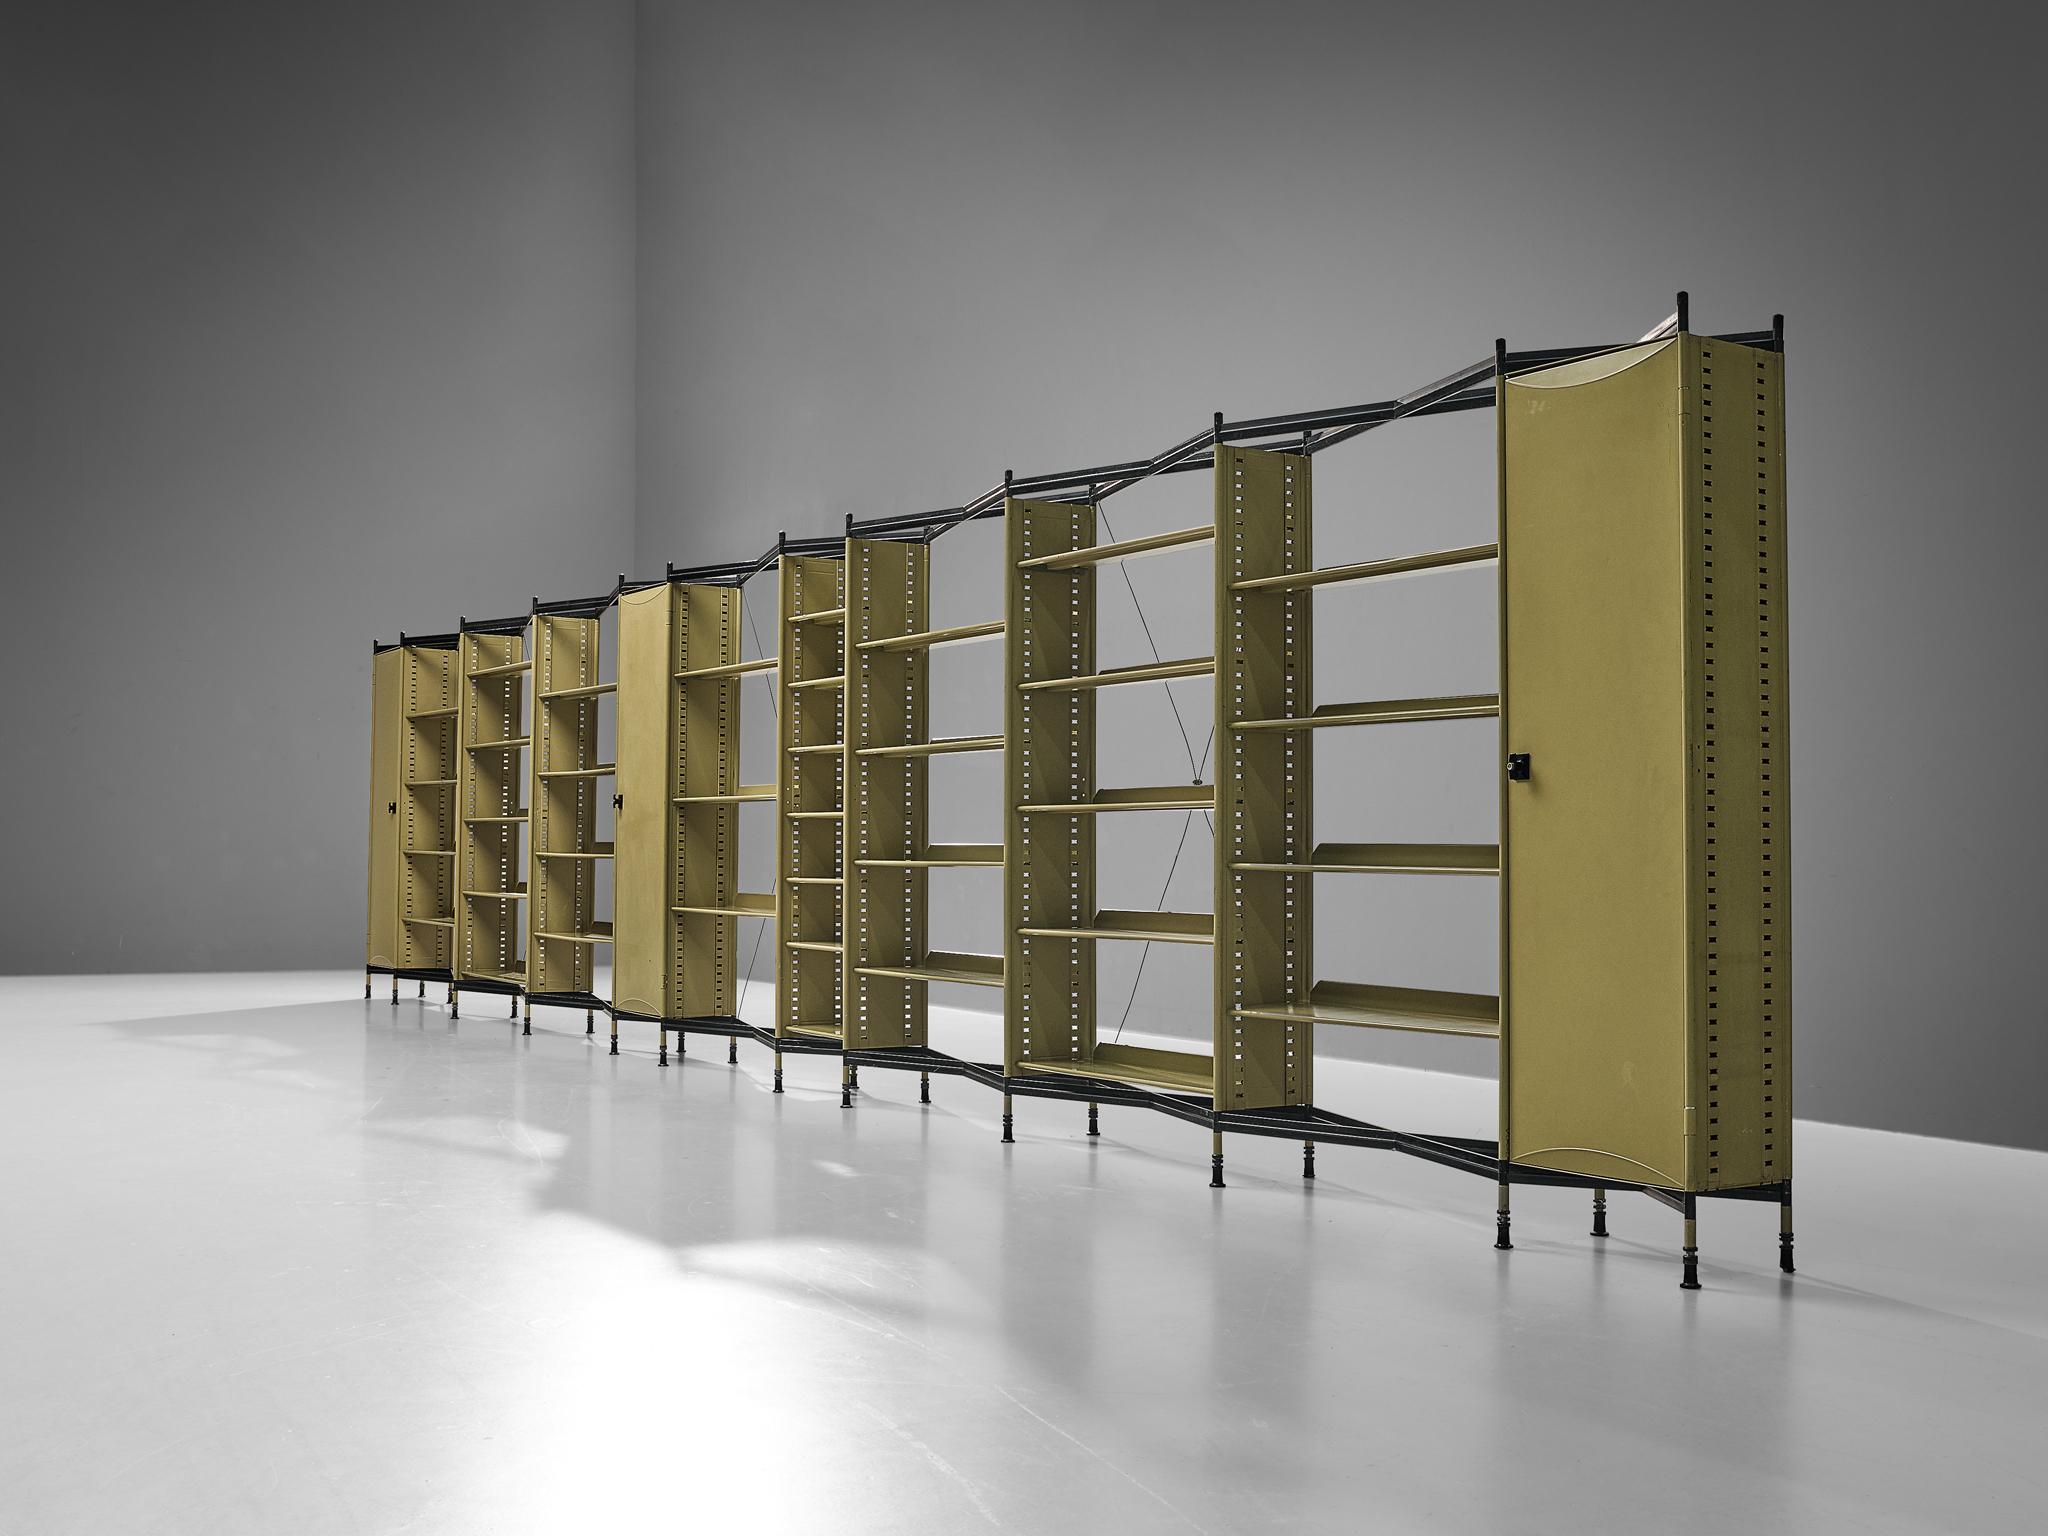 Studio BBPR for Olivetti, 'Spazio' large shelving system, metal, plastic, Italy, 1960

This tremendous shelving unit is designed by Studio BBPR for Olivetti in 1960 as part of the 'Spazio' series. The design won the Compasso d'Oro Award in 1962.